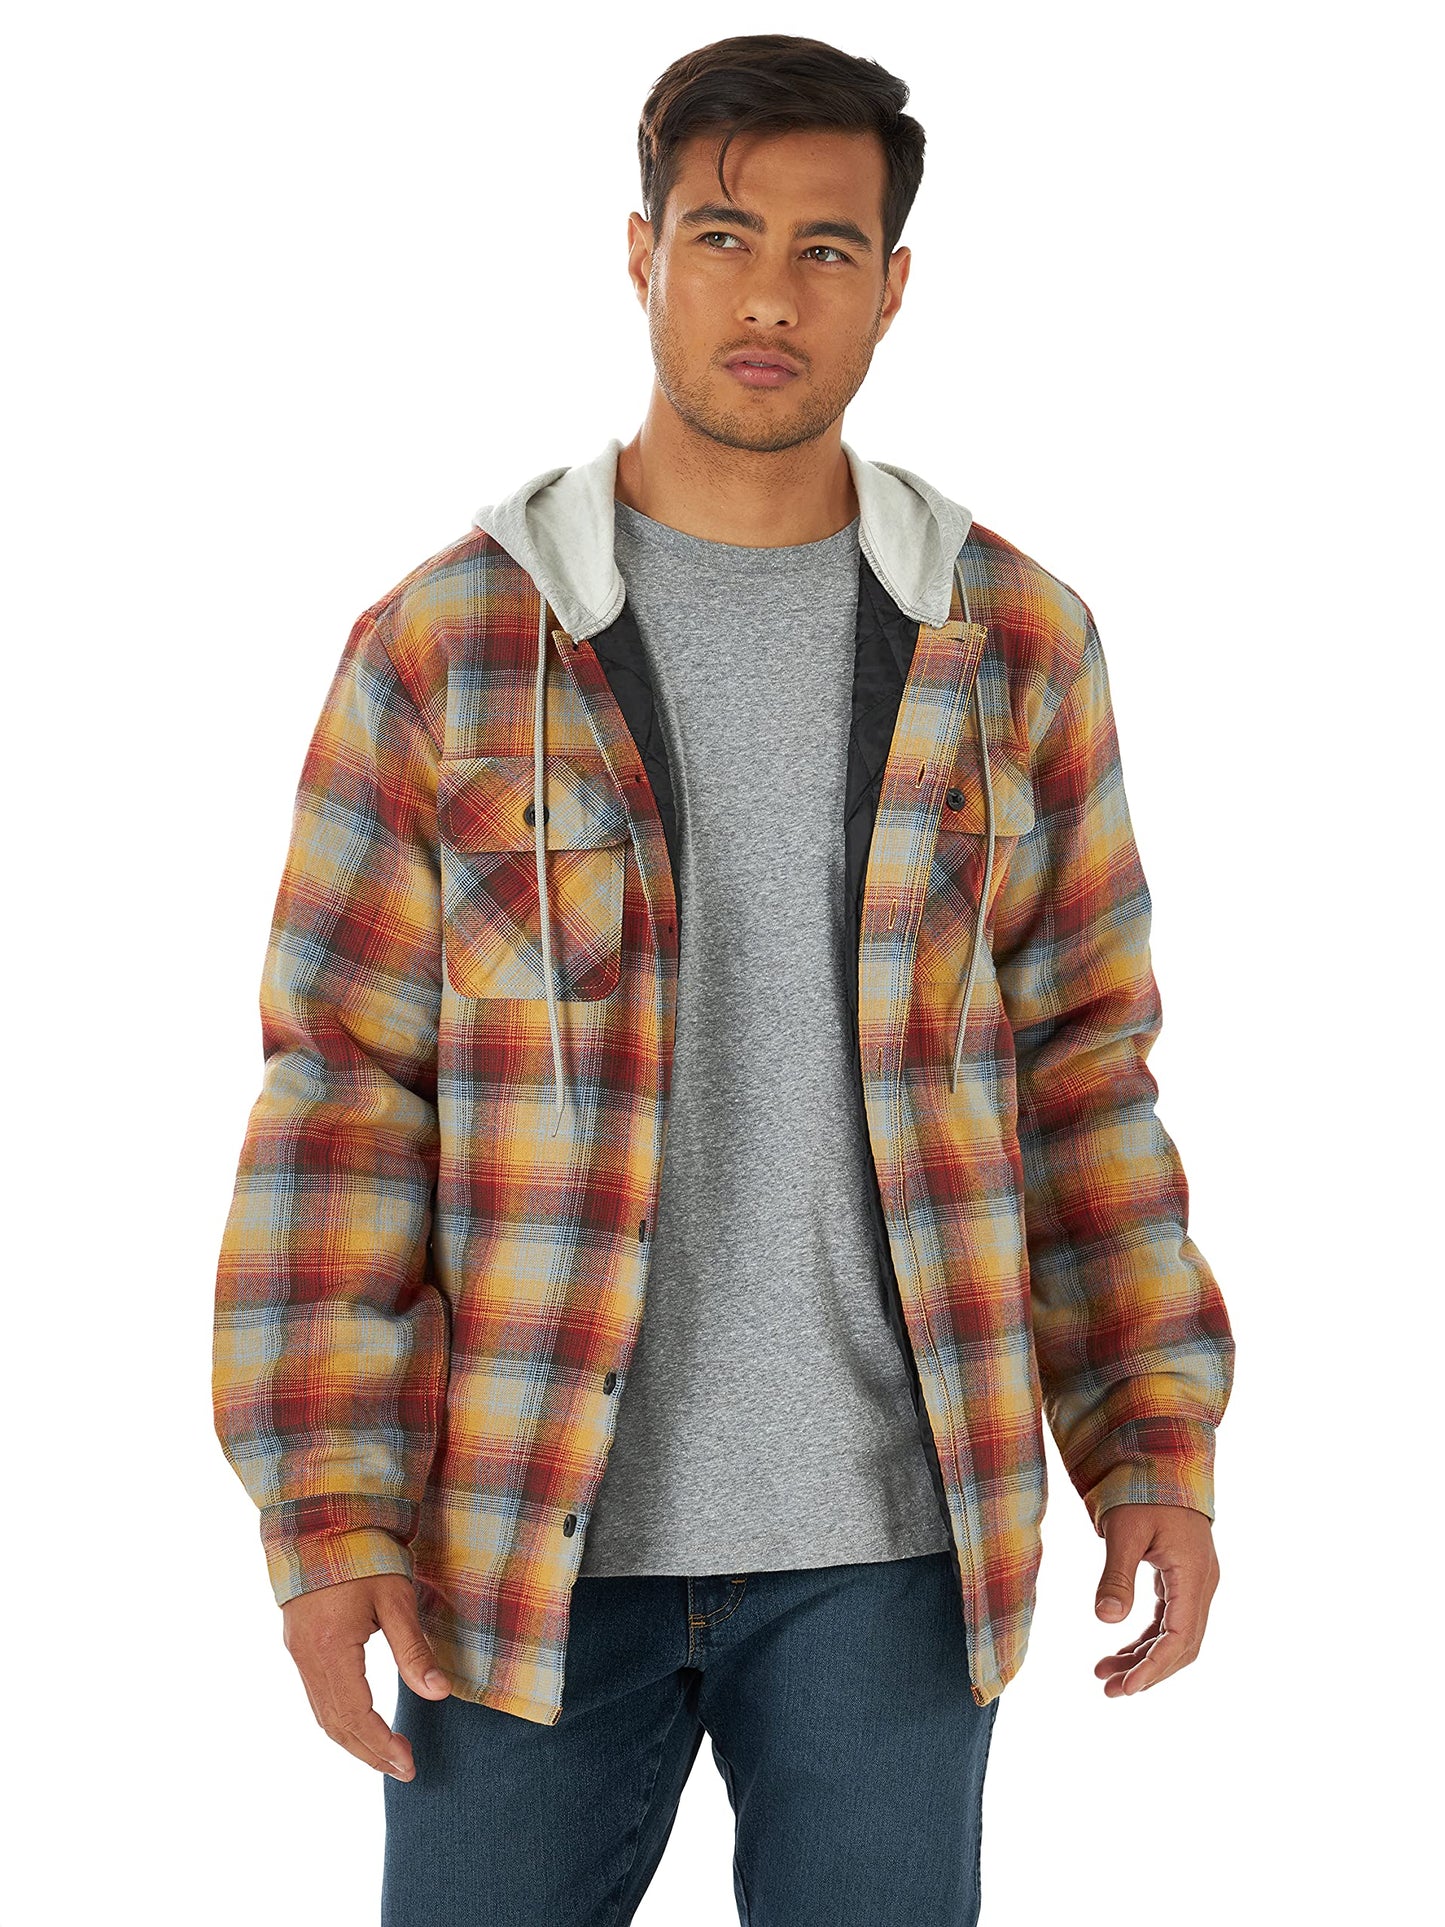 Wrangler Authentics Men's Long Sleeve Quilted Lined Flannel Shirt Jacket with Hood, Red/Yellow, Large